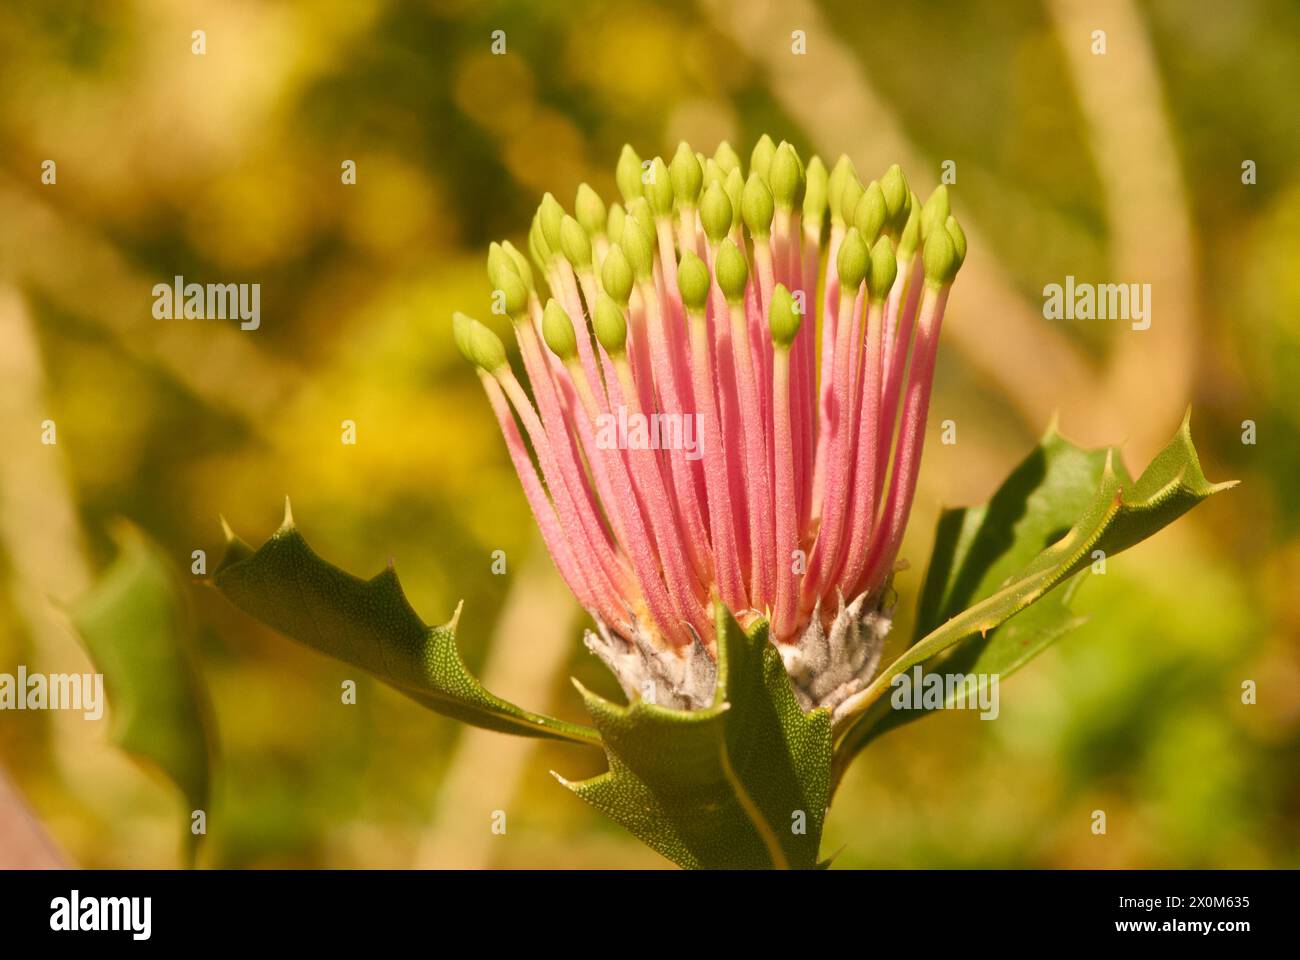 A flower head of Holly-leaved Banksia, Banksia ilicifolia, at the budding stage, endemic to south-west Western Australia. Grows as a shrub or tree. Stock Photo